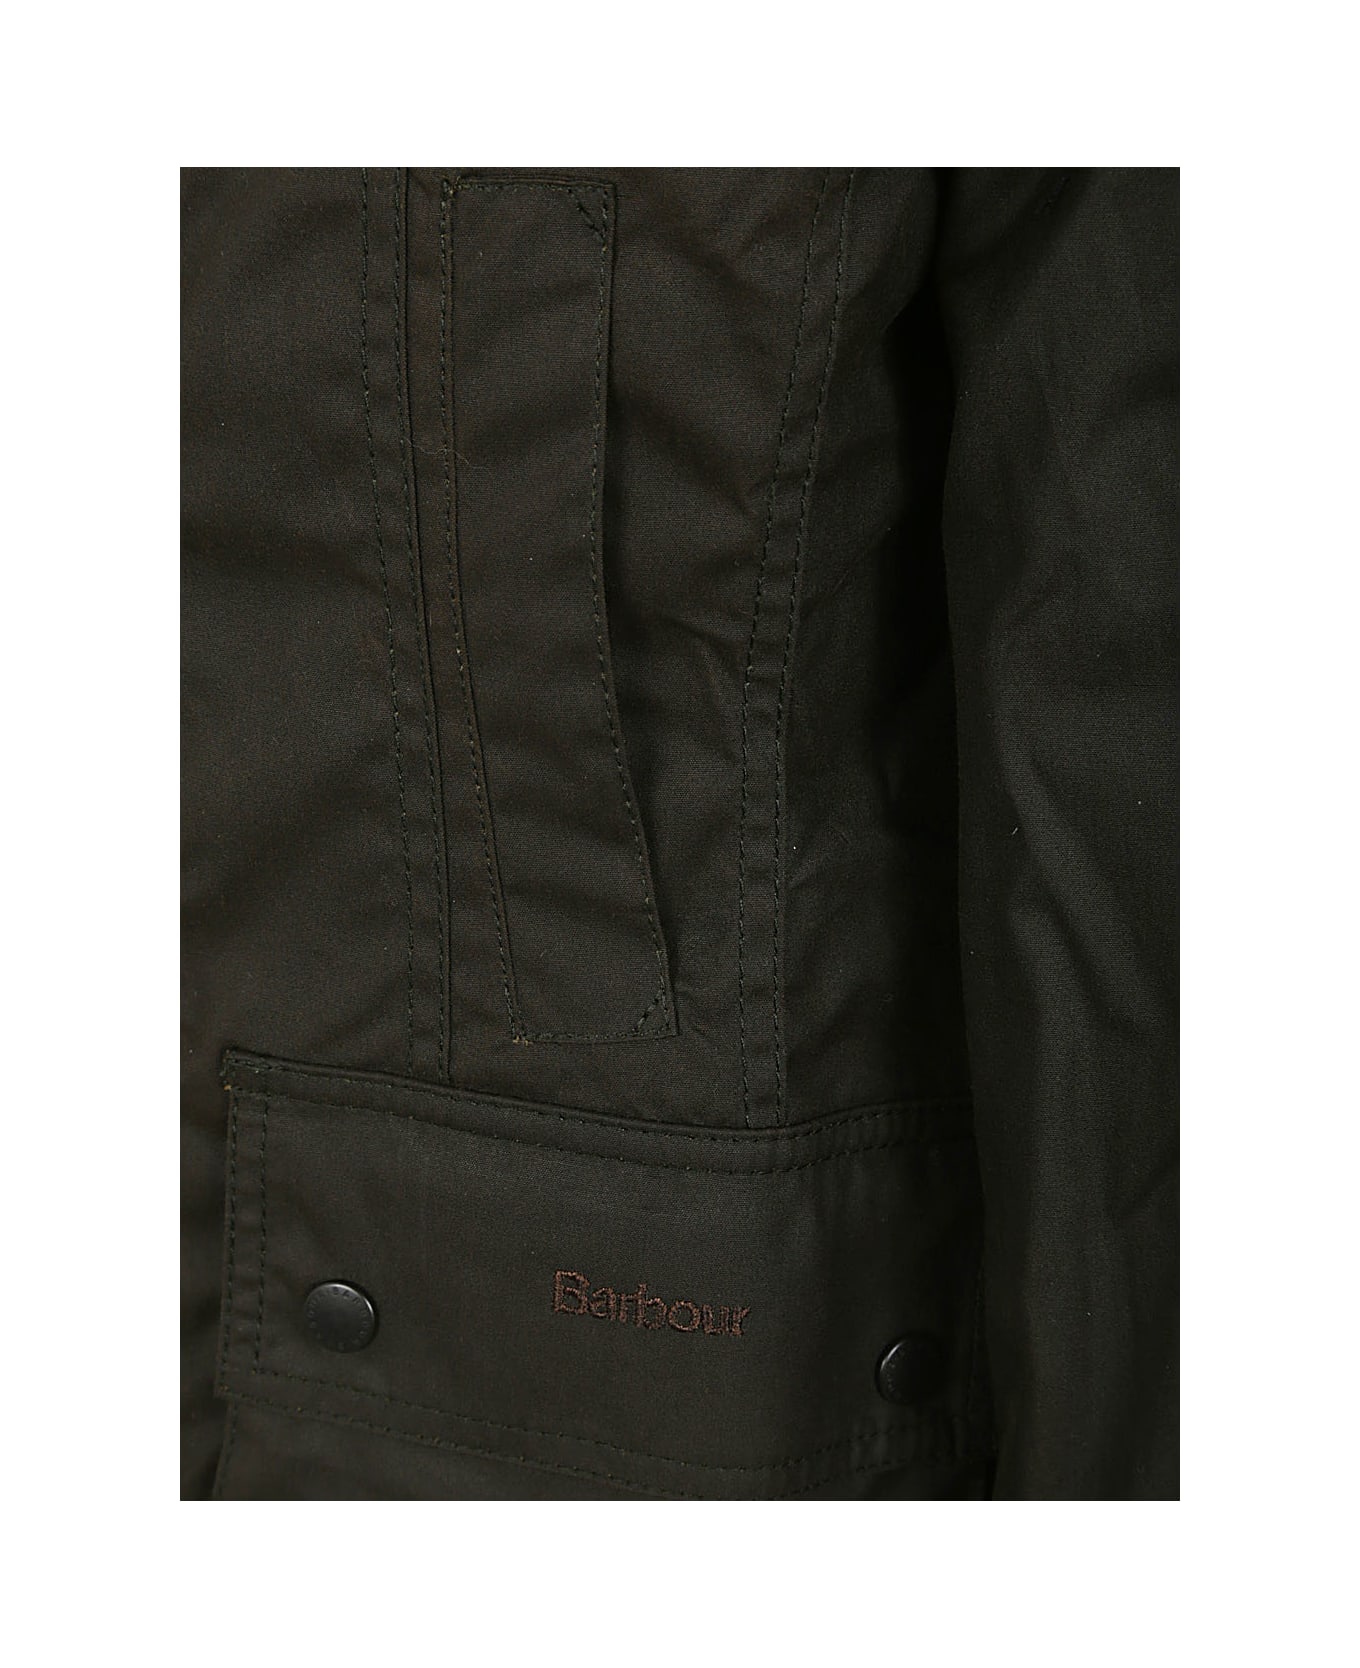 Barbour Beadnell Jacket - Olive